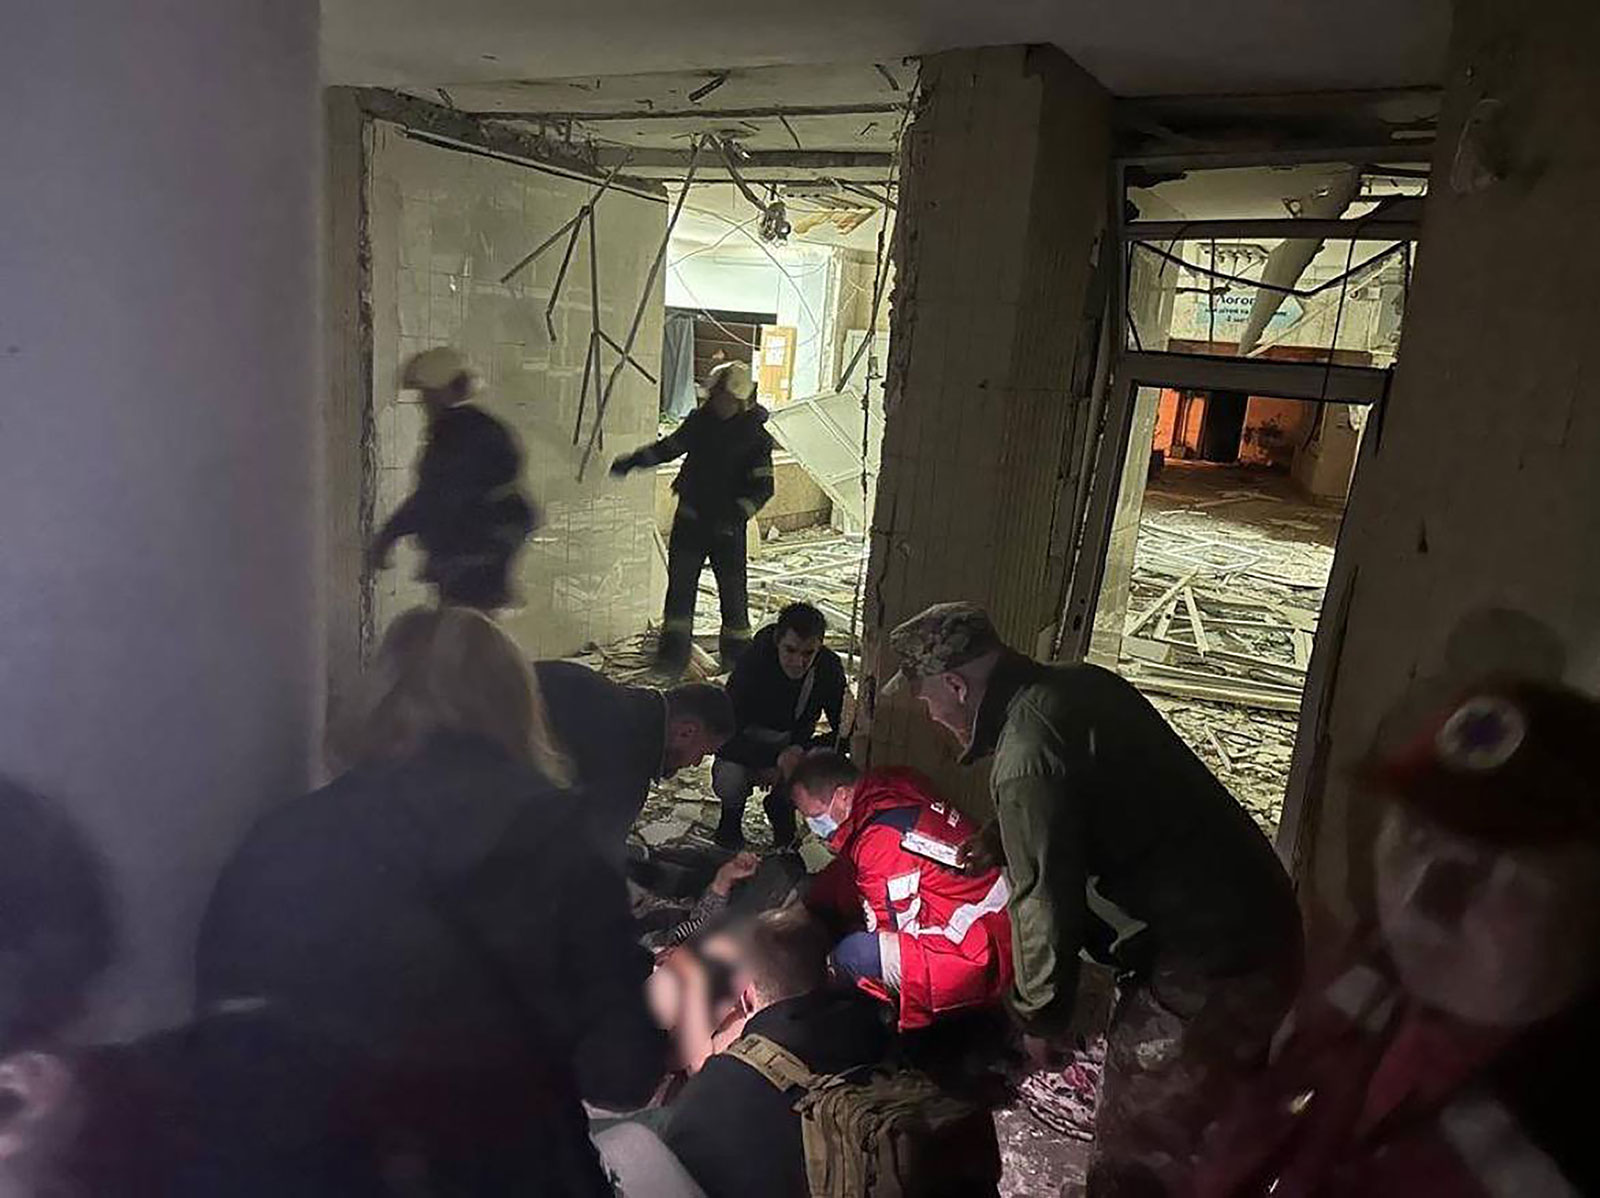 Emergency services responds after an early morning airstrike in Kyiv's Desnianskyi district. Portions of this image were obscured before they were provided to CNN.